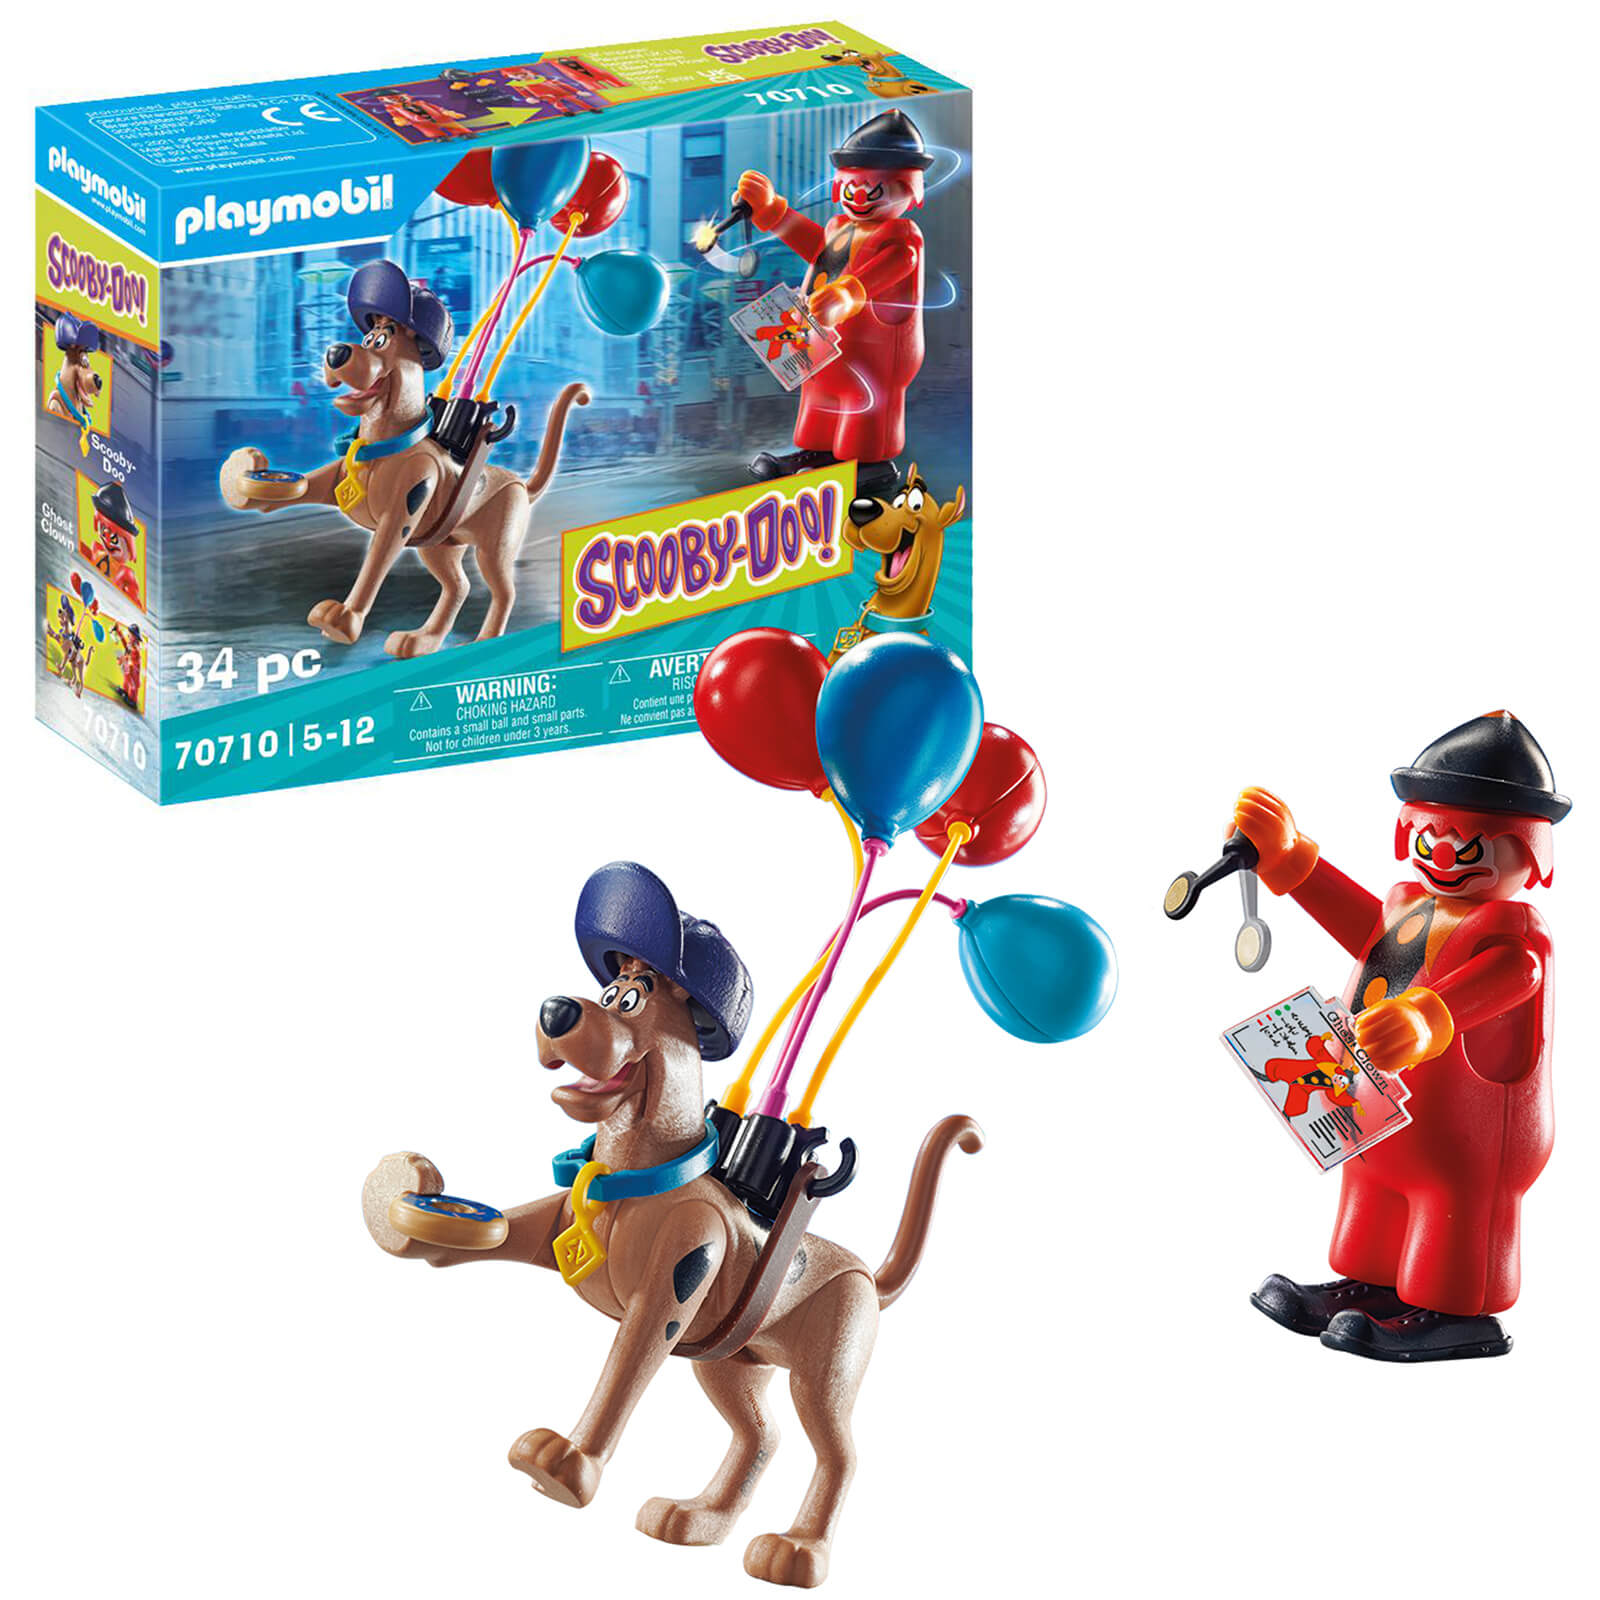 Playmobil SCOOBY DOO! Adventure With Ghost Clown (70710)